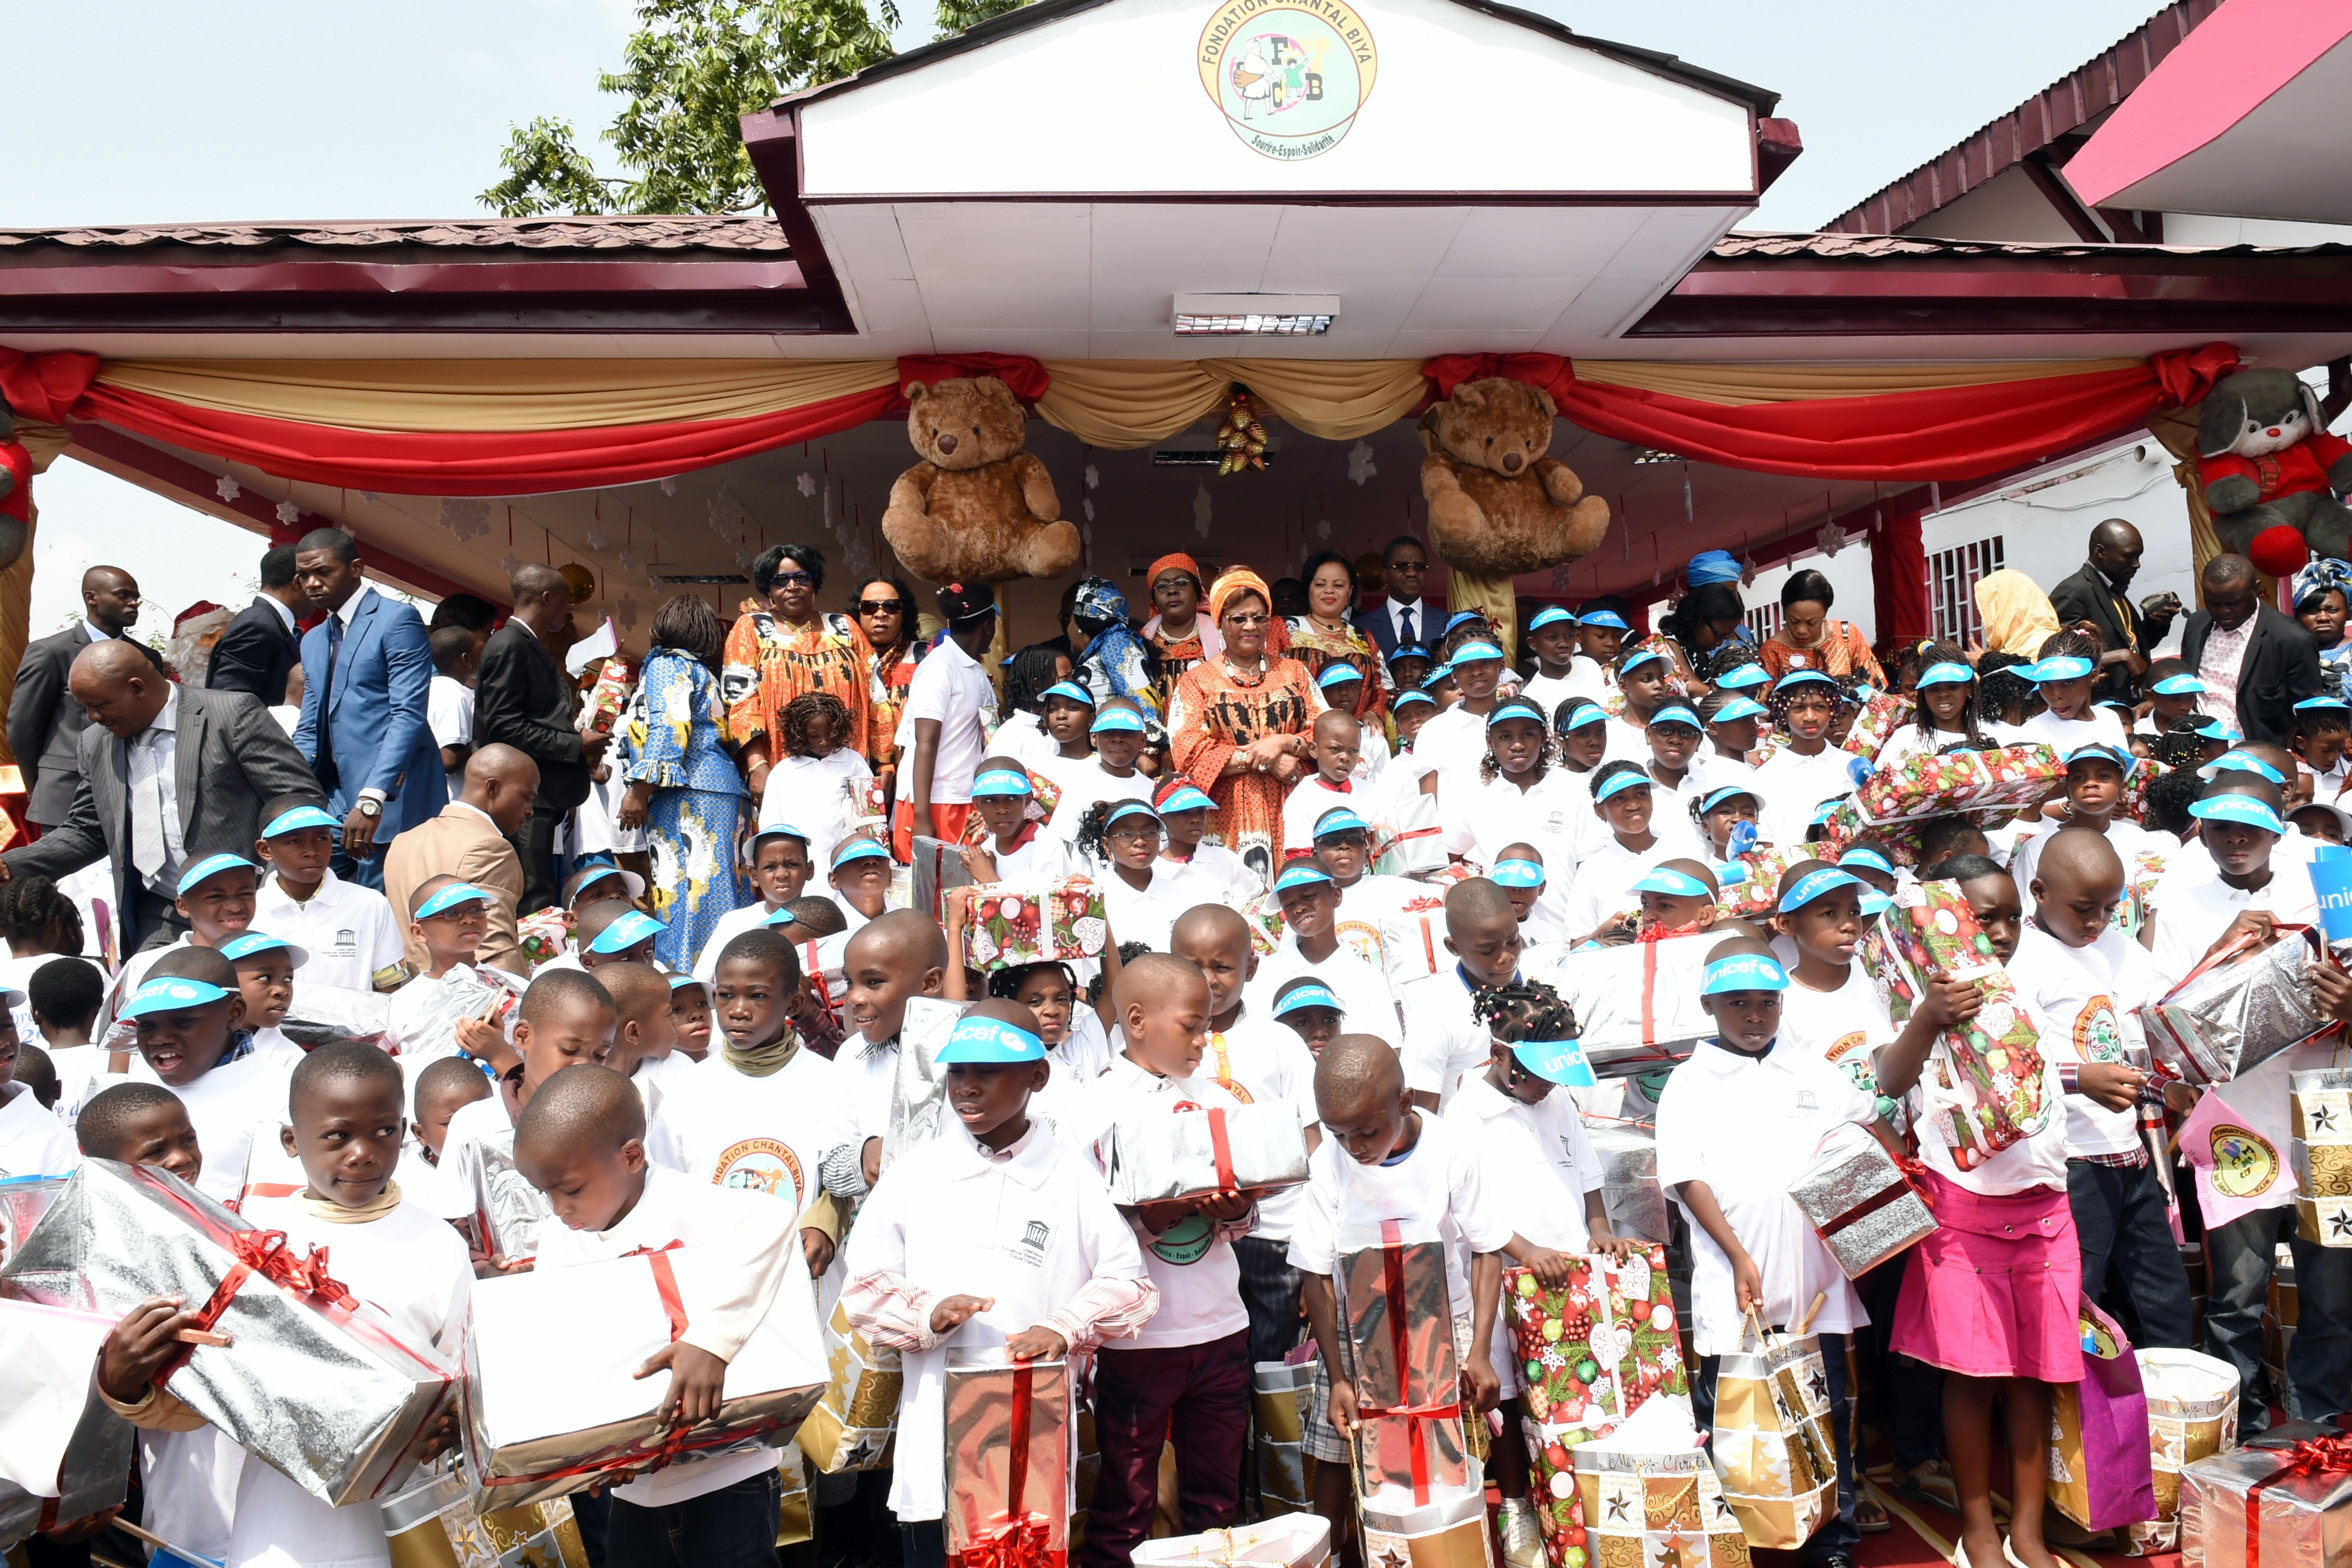 Colourful gifts for children at the Chantal BIYA Foundation